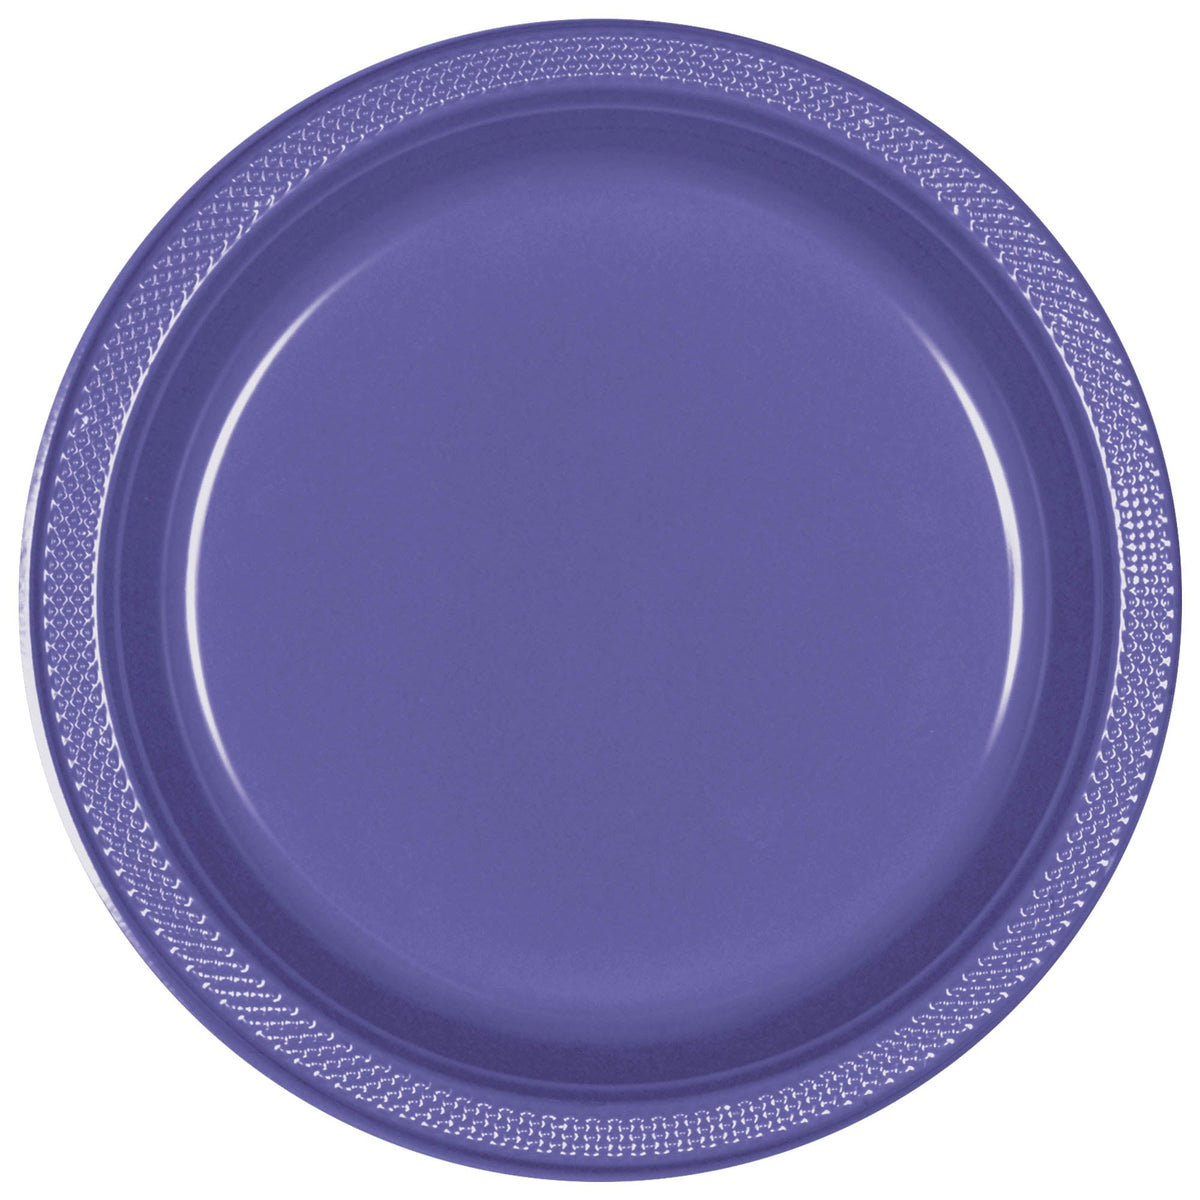 AMSCAN CA Disposable-Plasticware New Purple Large Round Lunch Plastic Plates, 10.25 Inches, 20 Count 048419626060